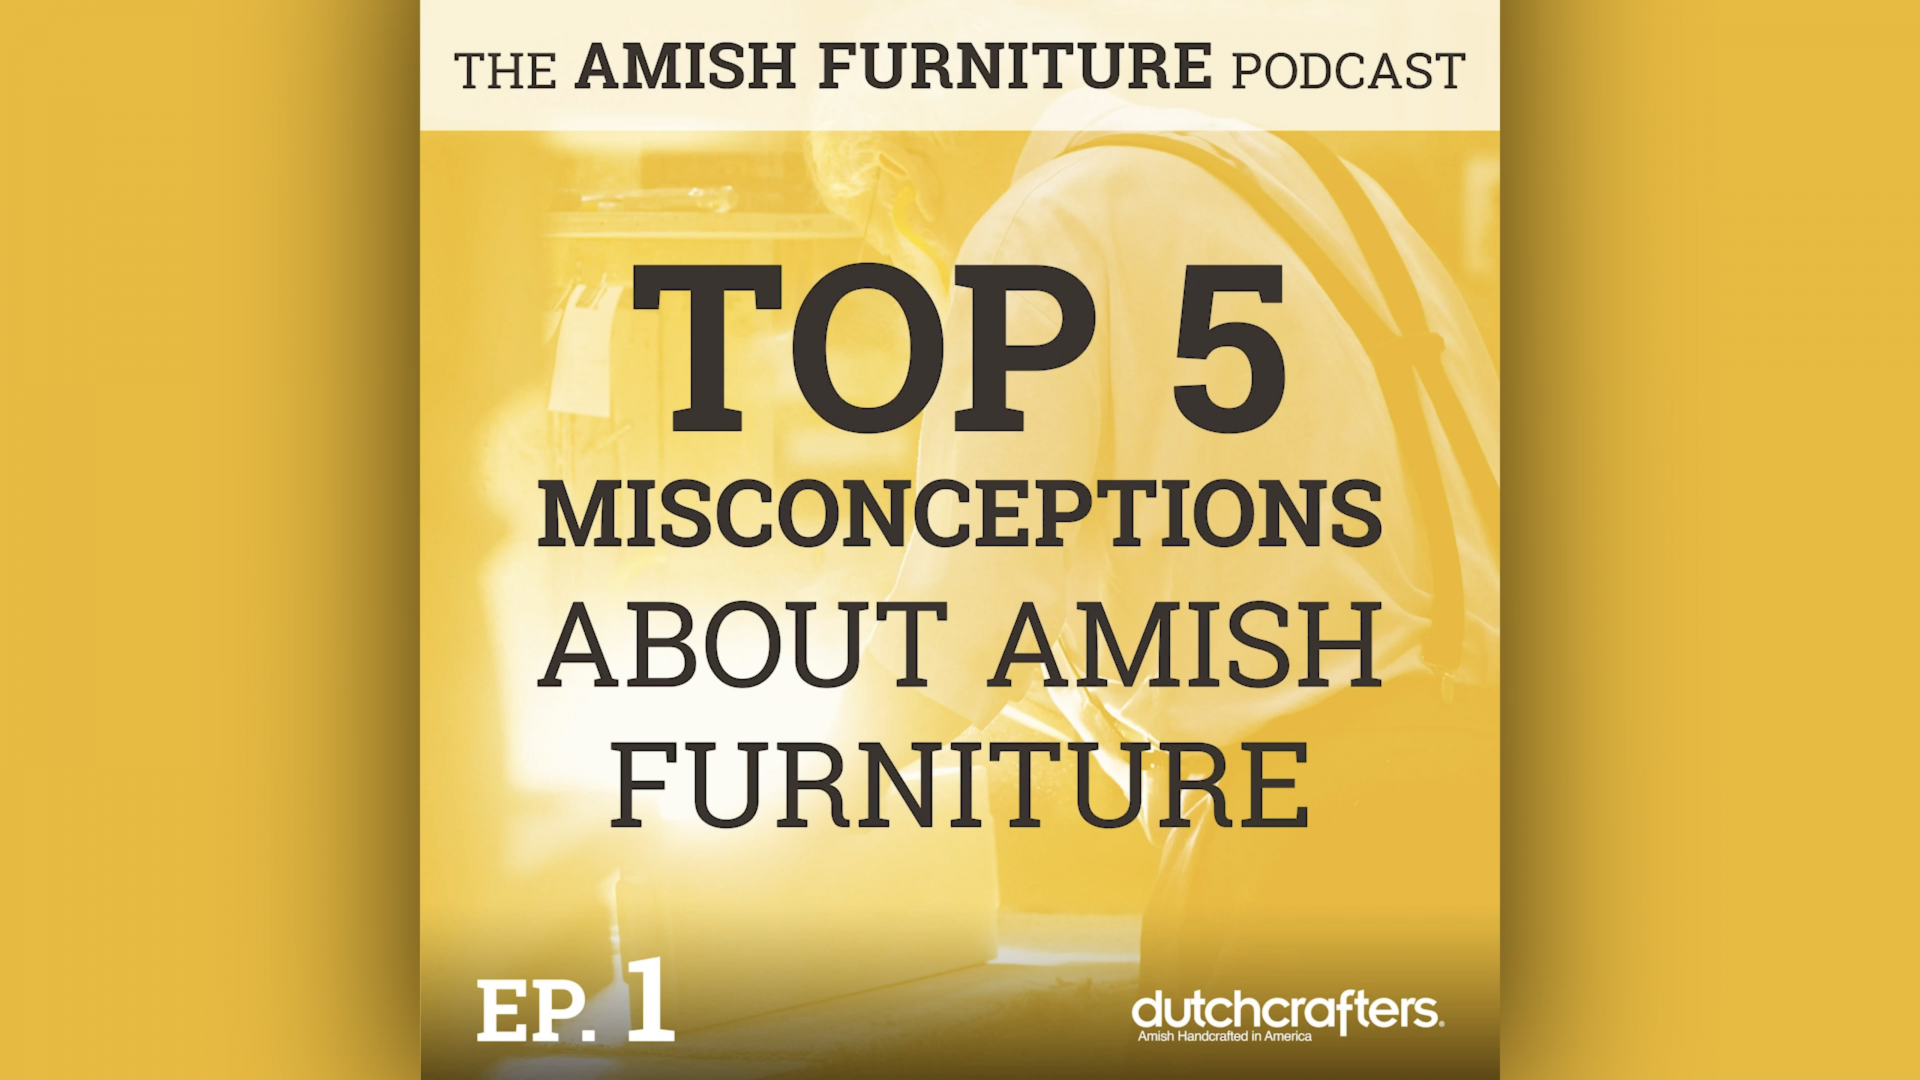 Top 5 Misconceptions About Amish Furniture